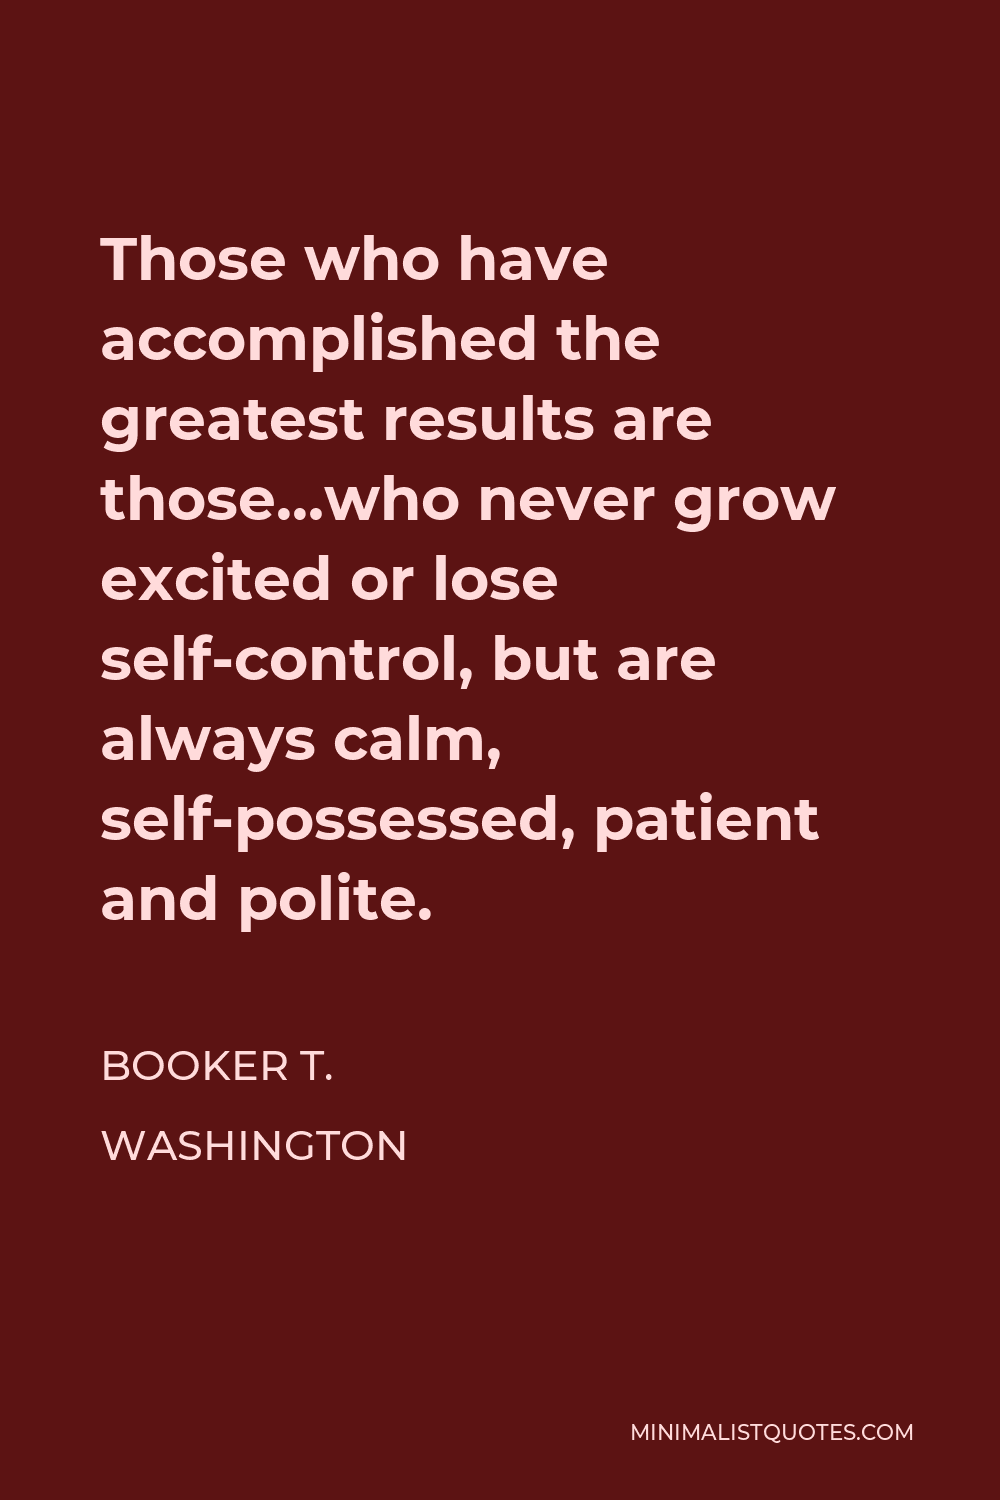 Booker T. Washington Quote - Those who have accomplished the greatest results are those who never grow excited or lose self-control, but are always calm, self-possessed, patient and polite.